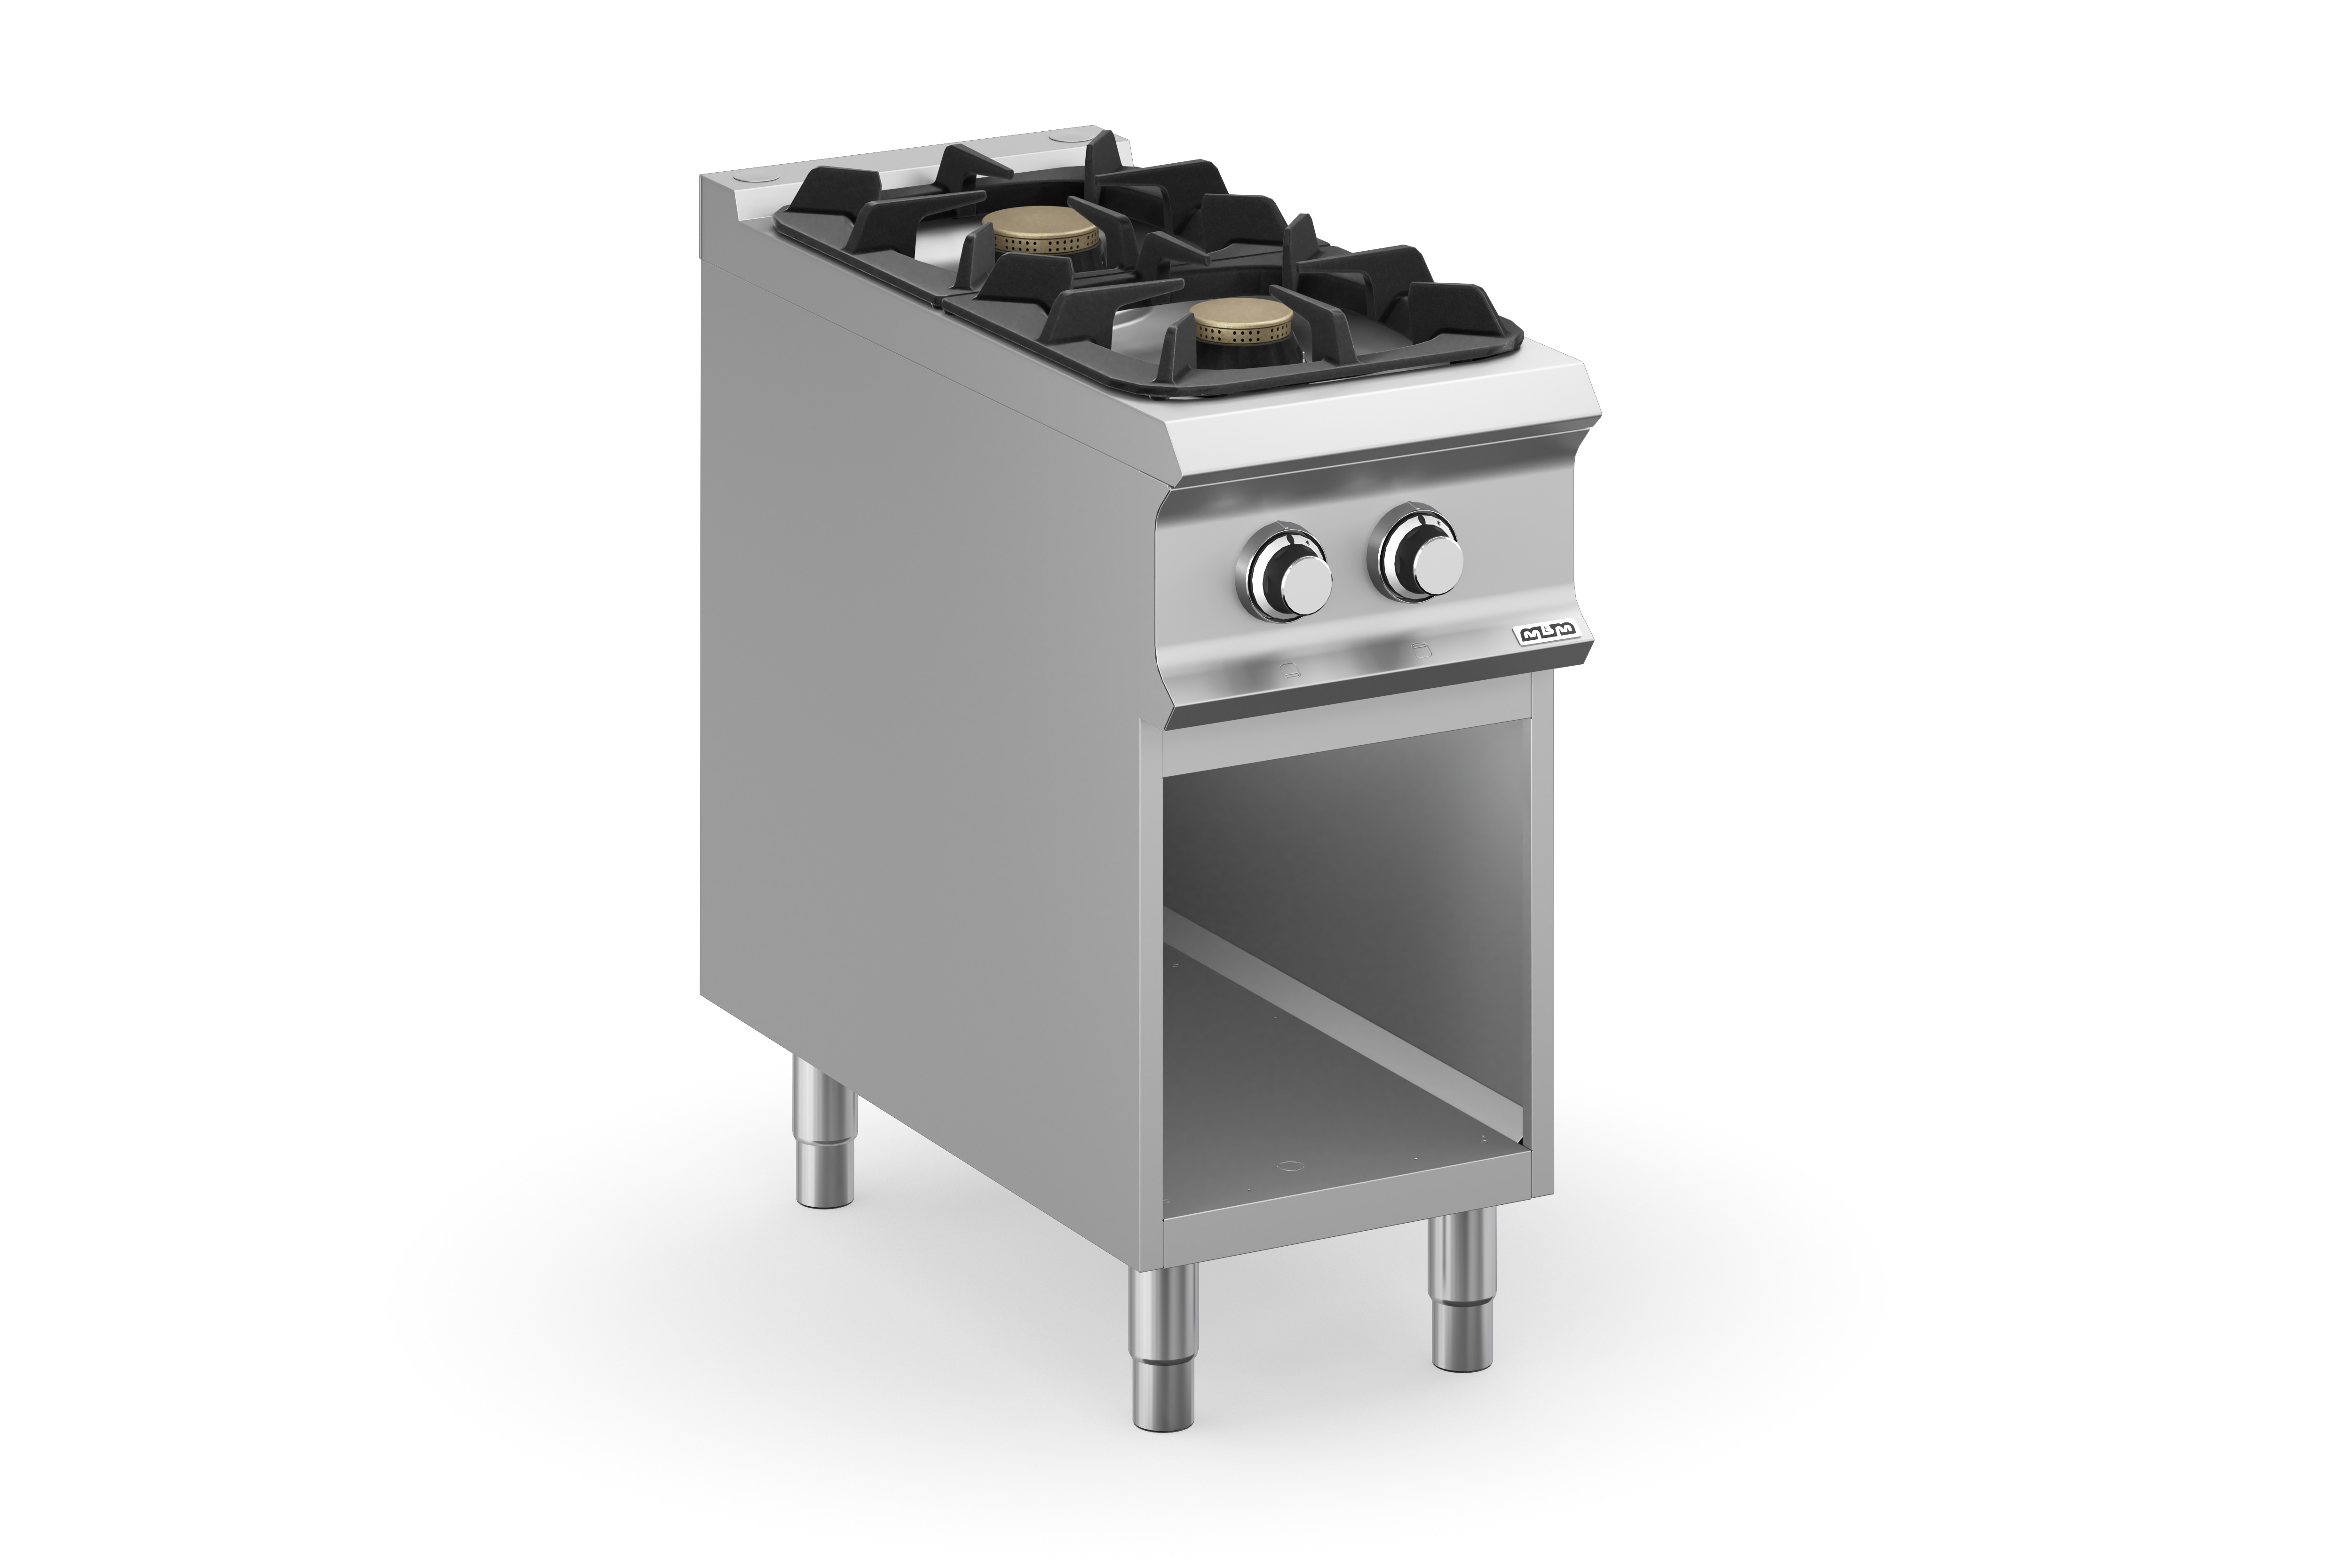 Domina Pro 900 FB94AXL 2 Burners Open Stand Gas Cooker